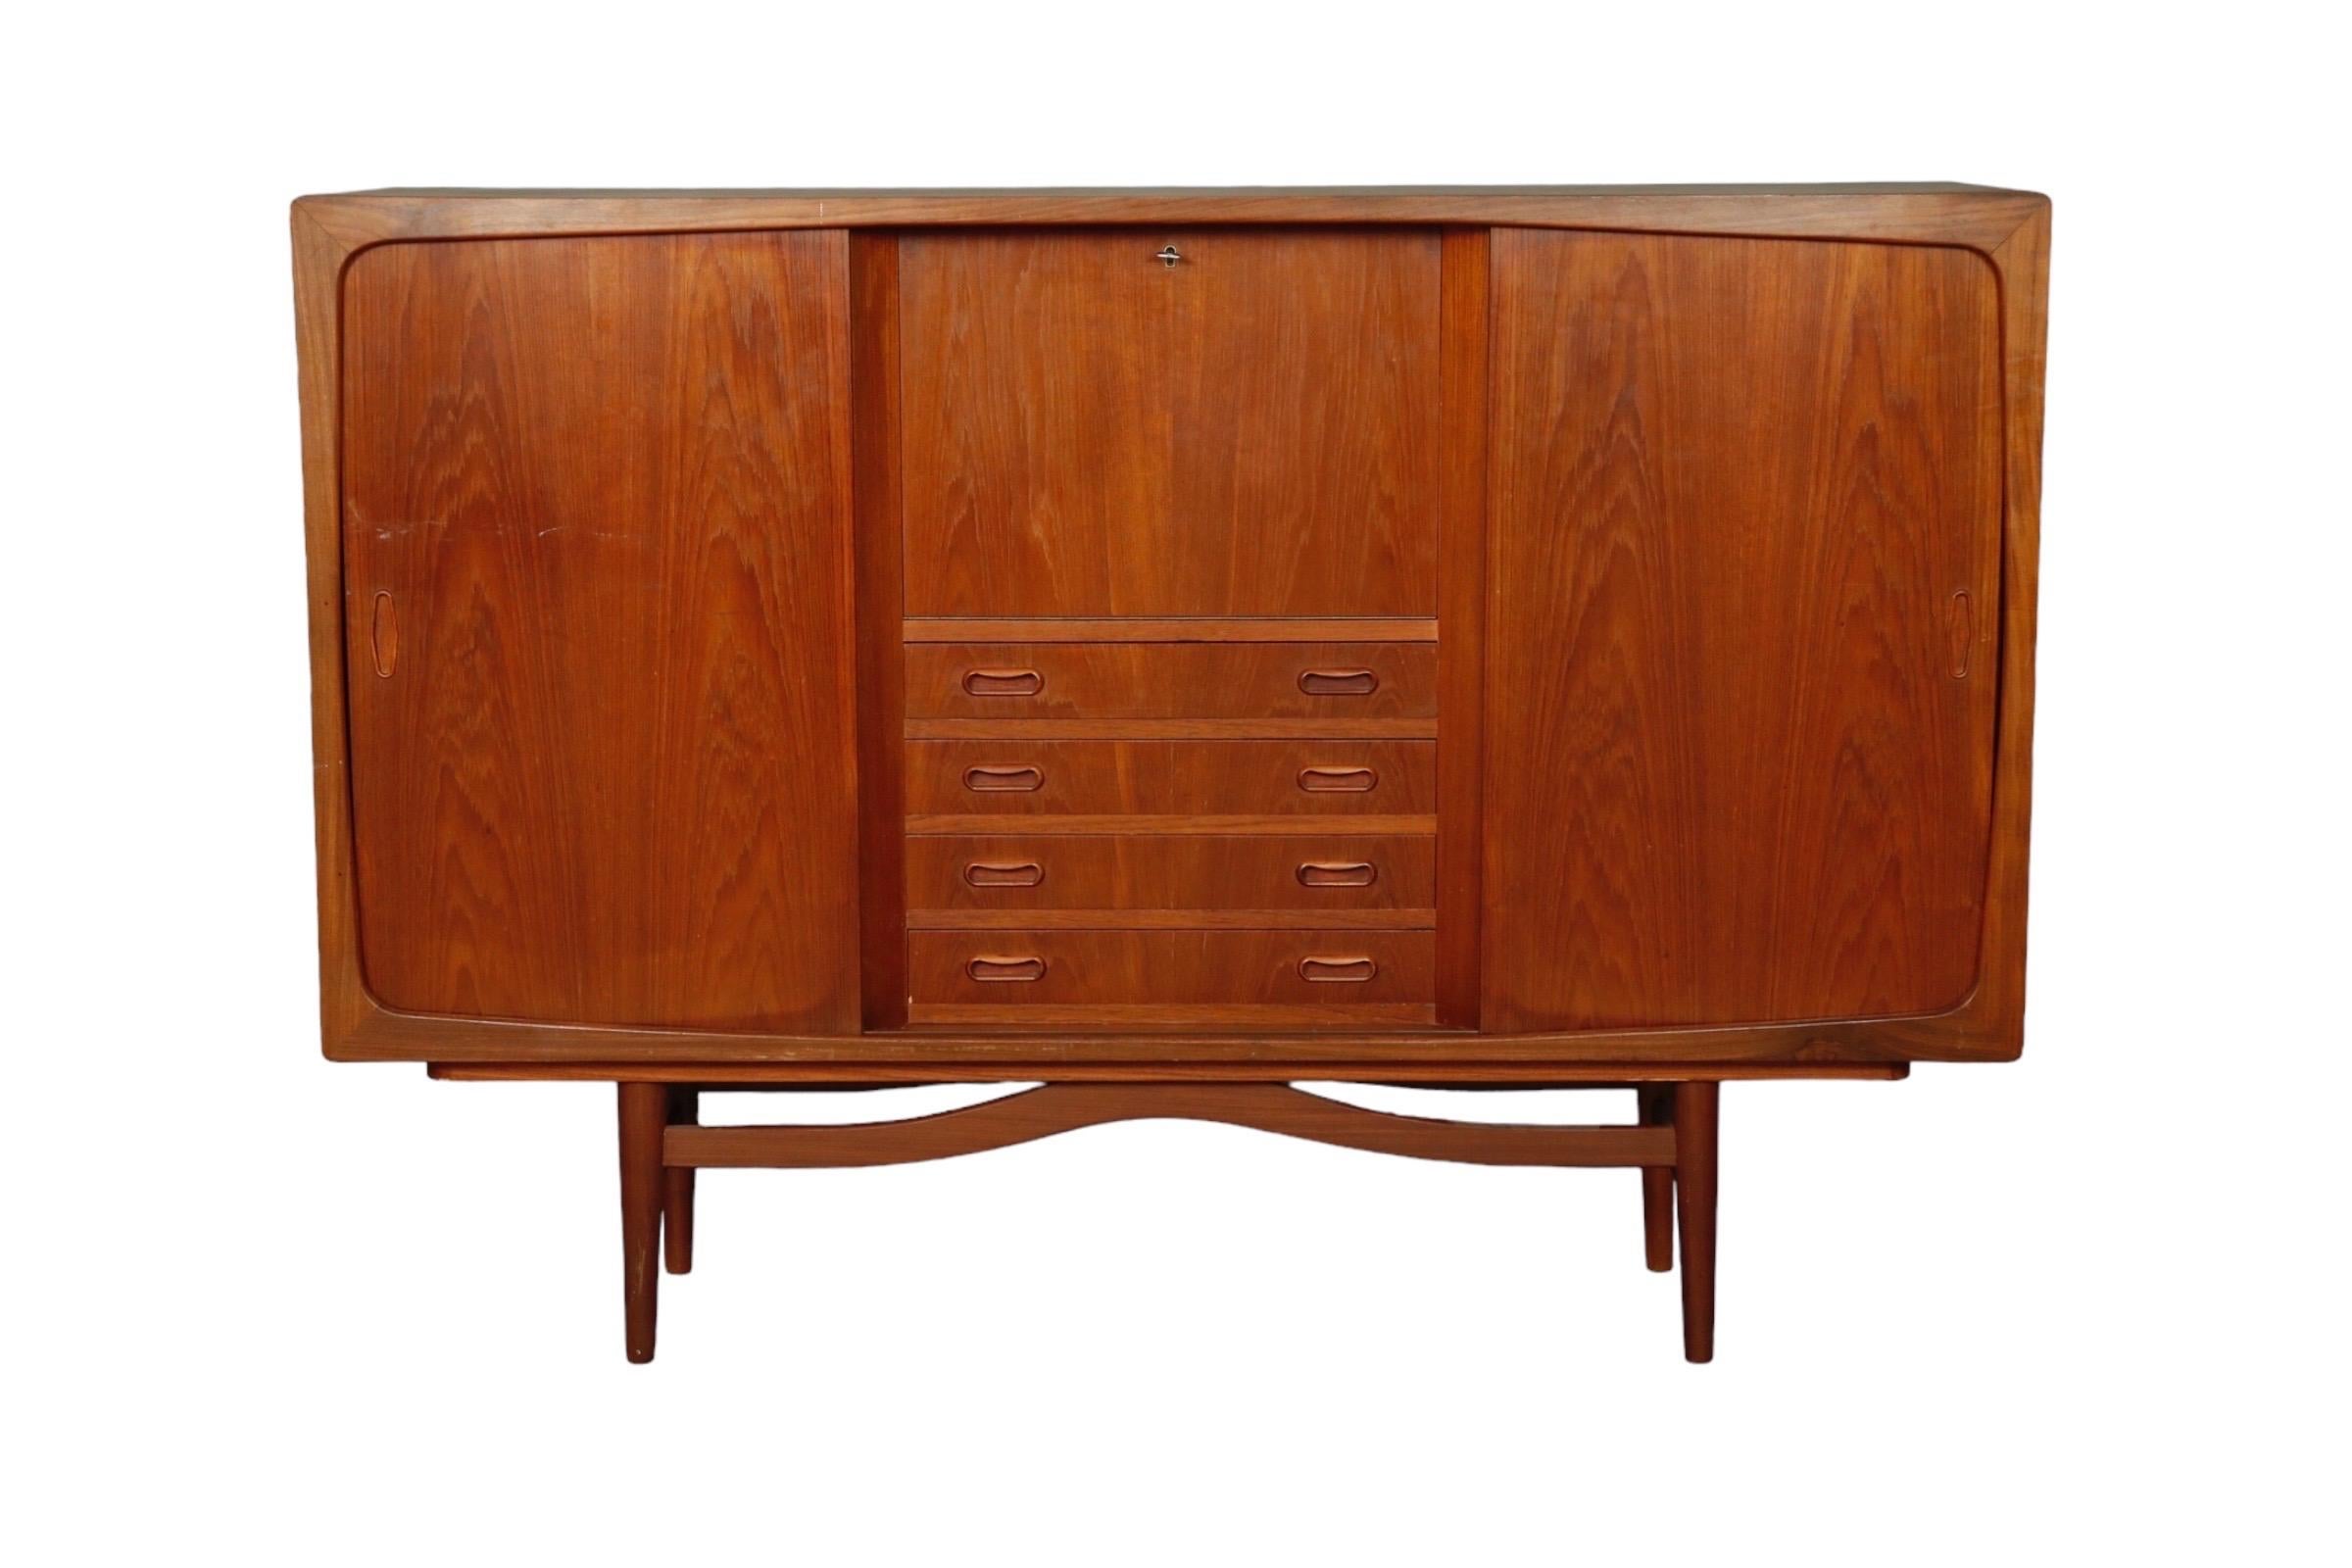 A Danish mid century modern buffet in teak. A central drop front reveals a mirrored bar area with a glass shelf. Below are four drawers with kidney shaped recessed handles. Sliding doors on each side decorated with bookmatched veneers house storage